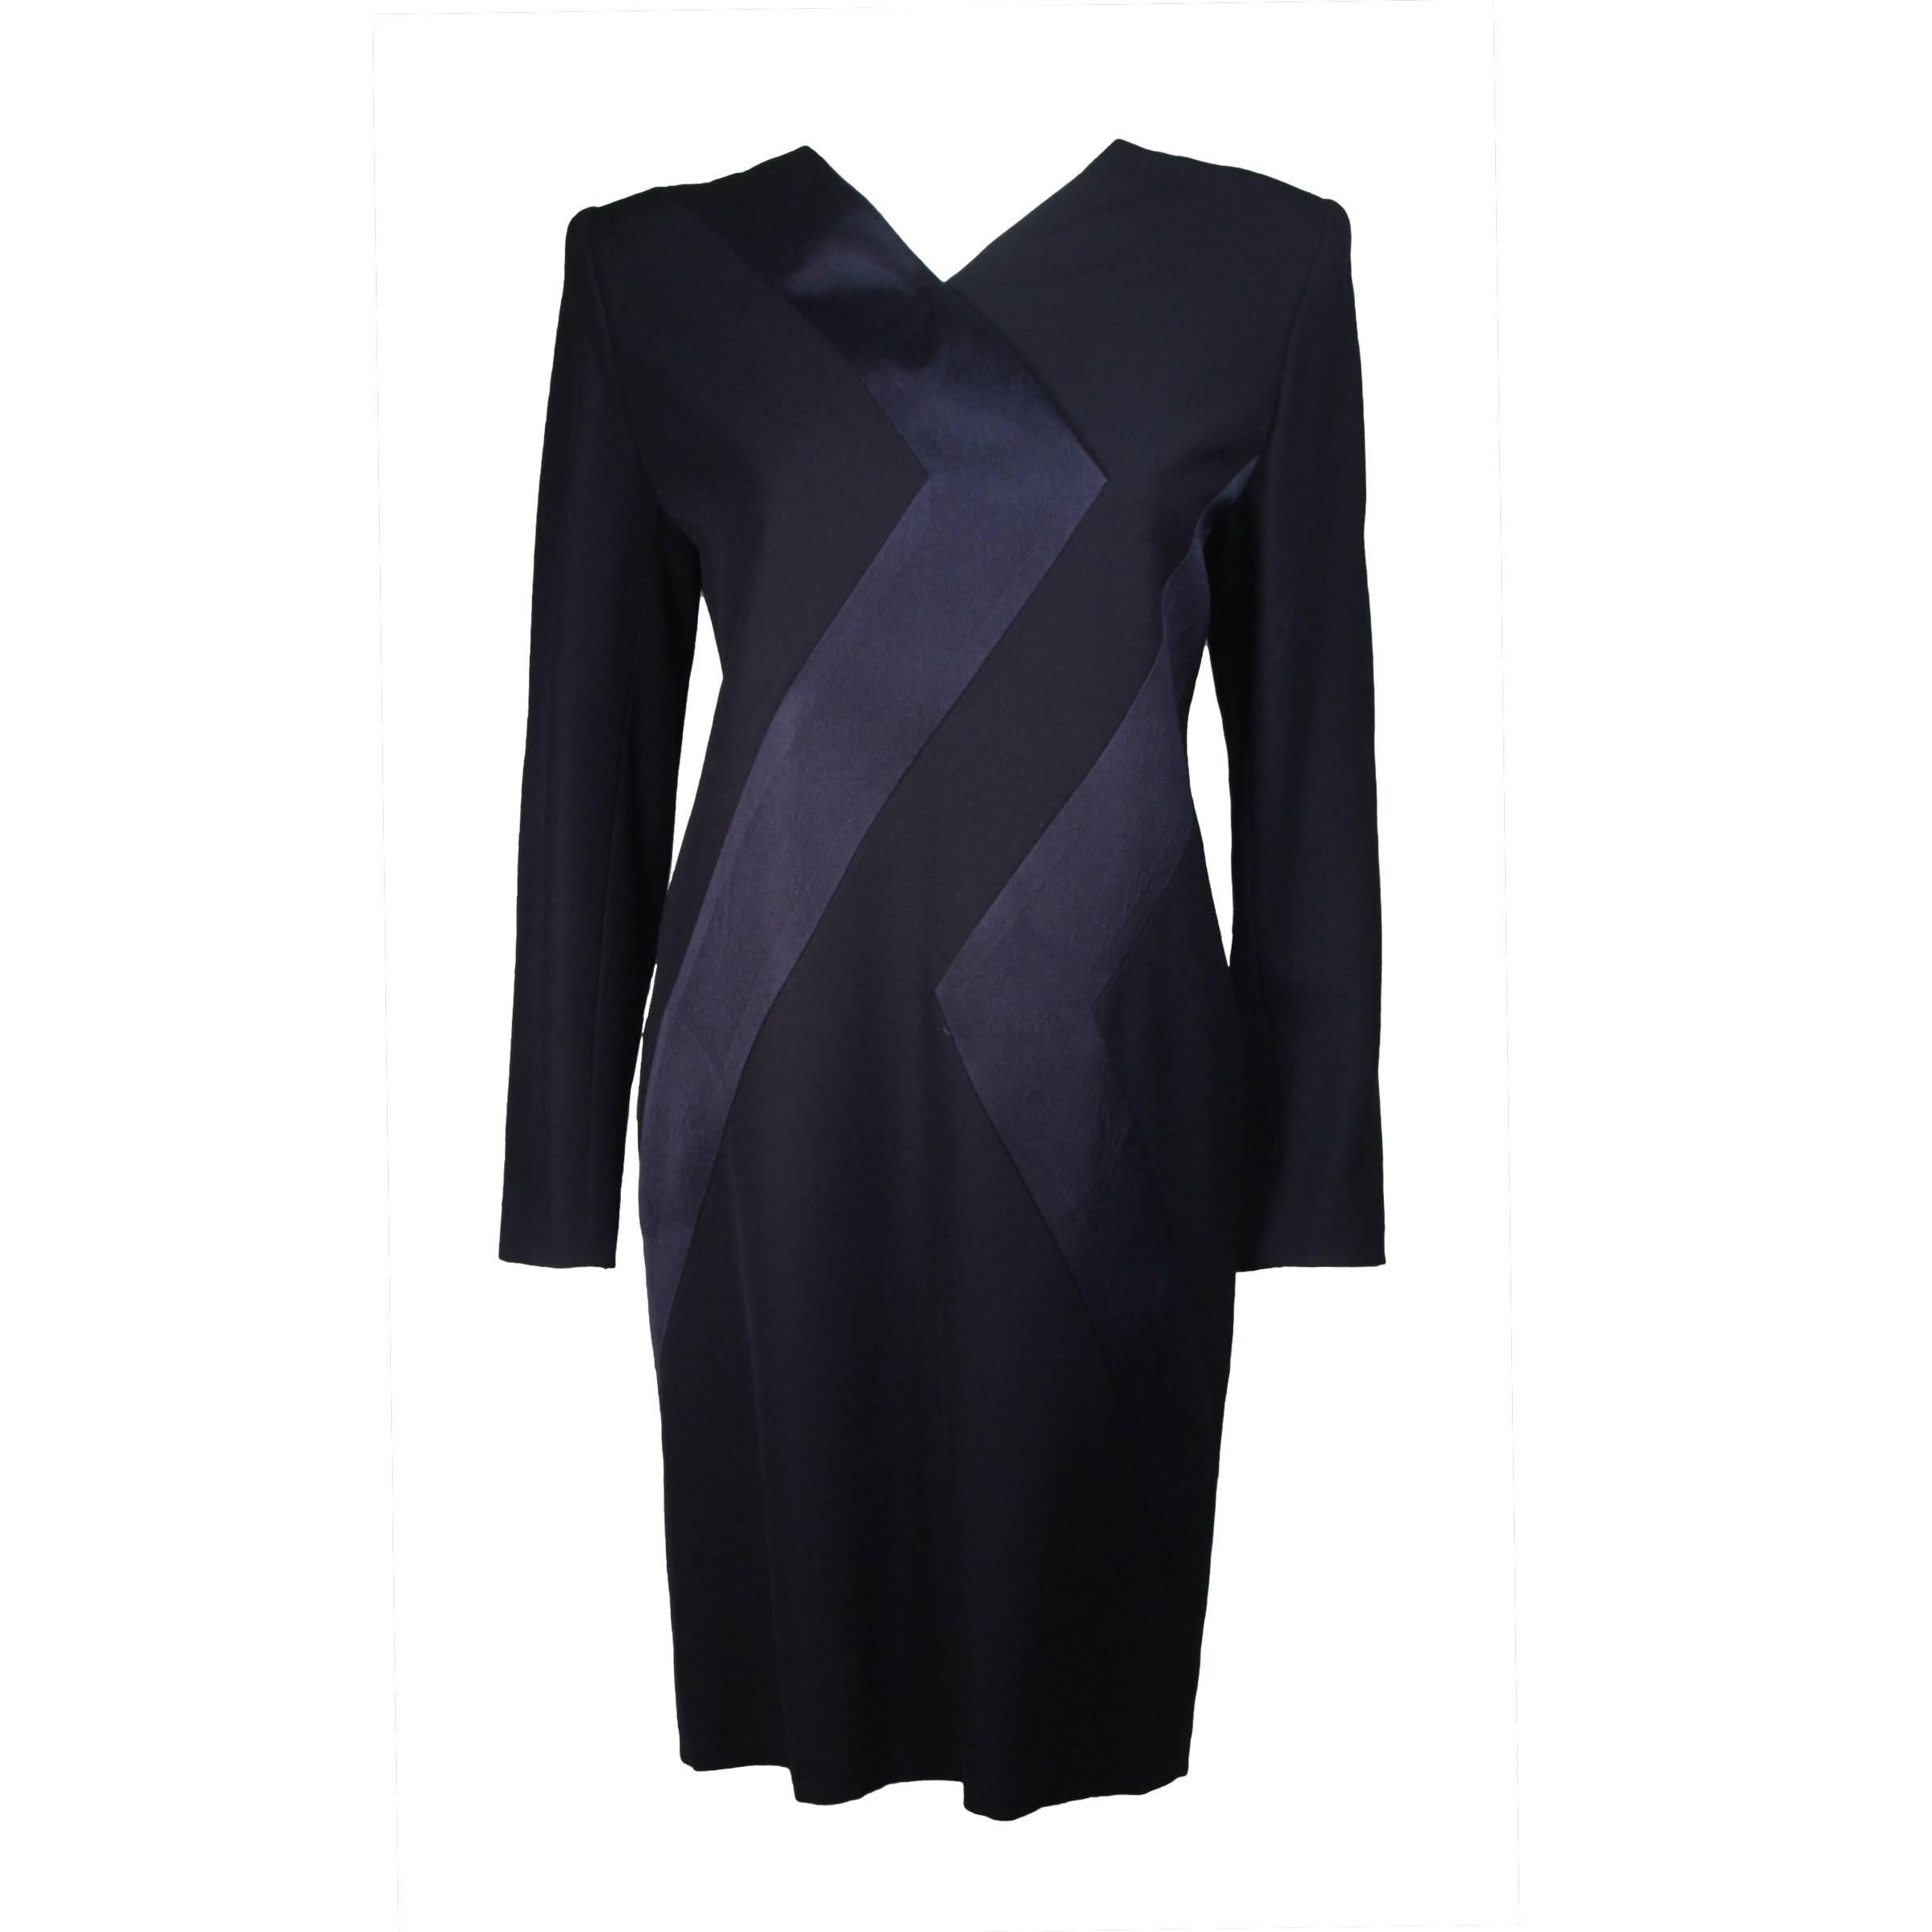 Galanos Navy Silk Cocktail Dress with Geometric Design Size Small Medium For Sale